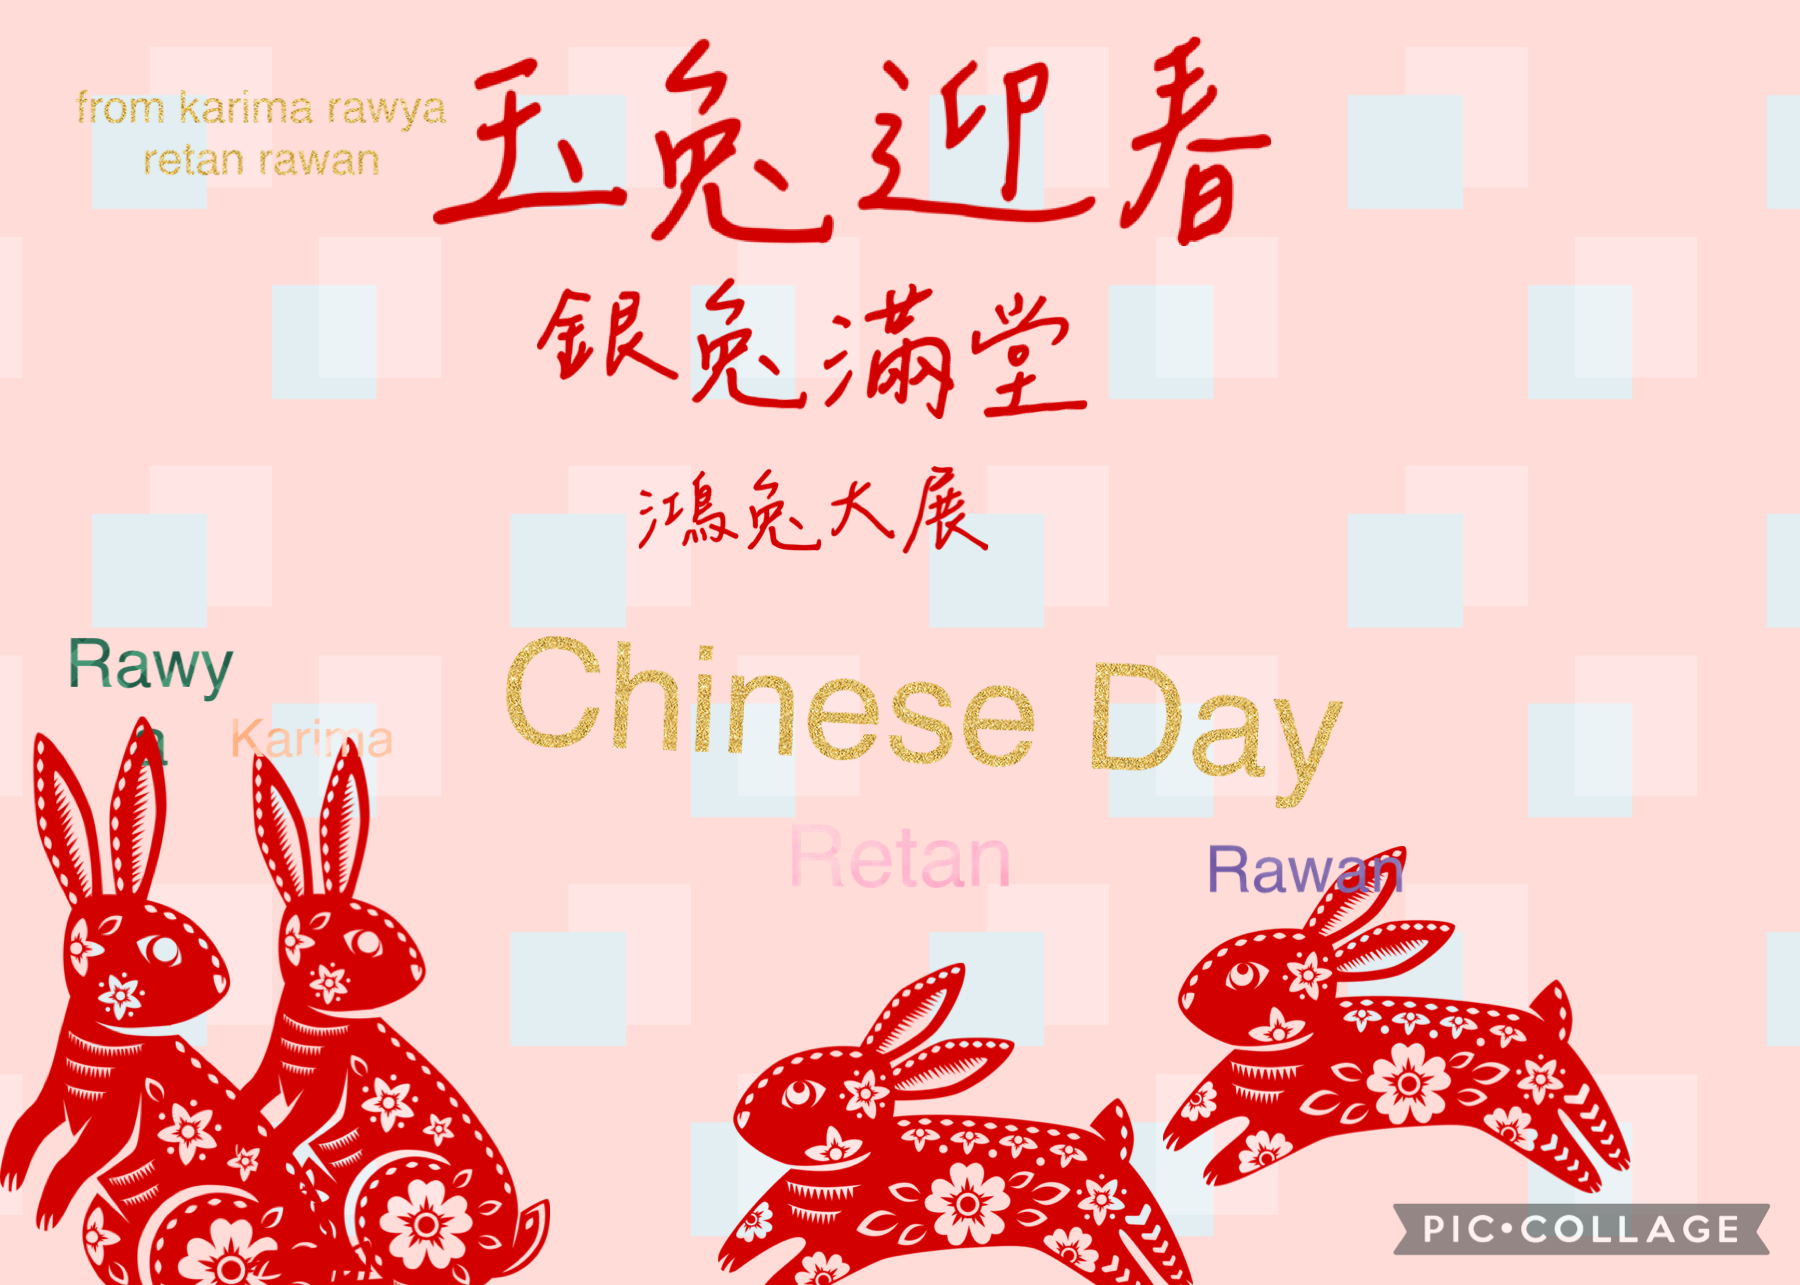 They si of Chinese day me and my friends 